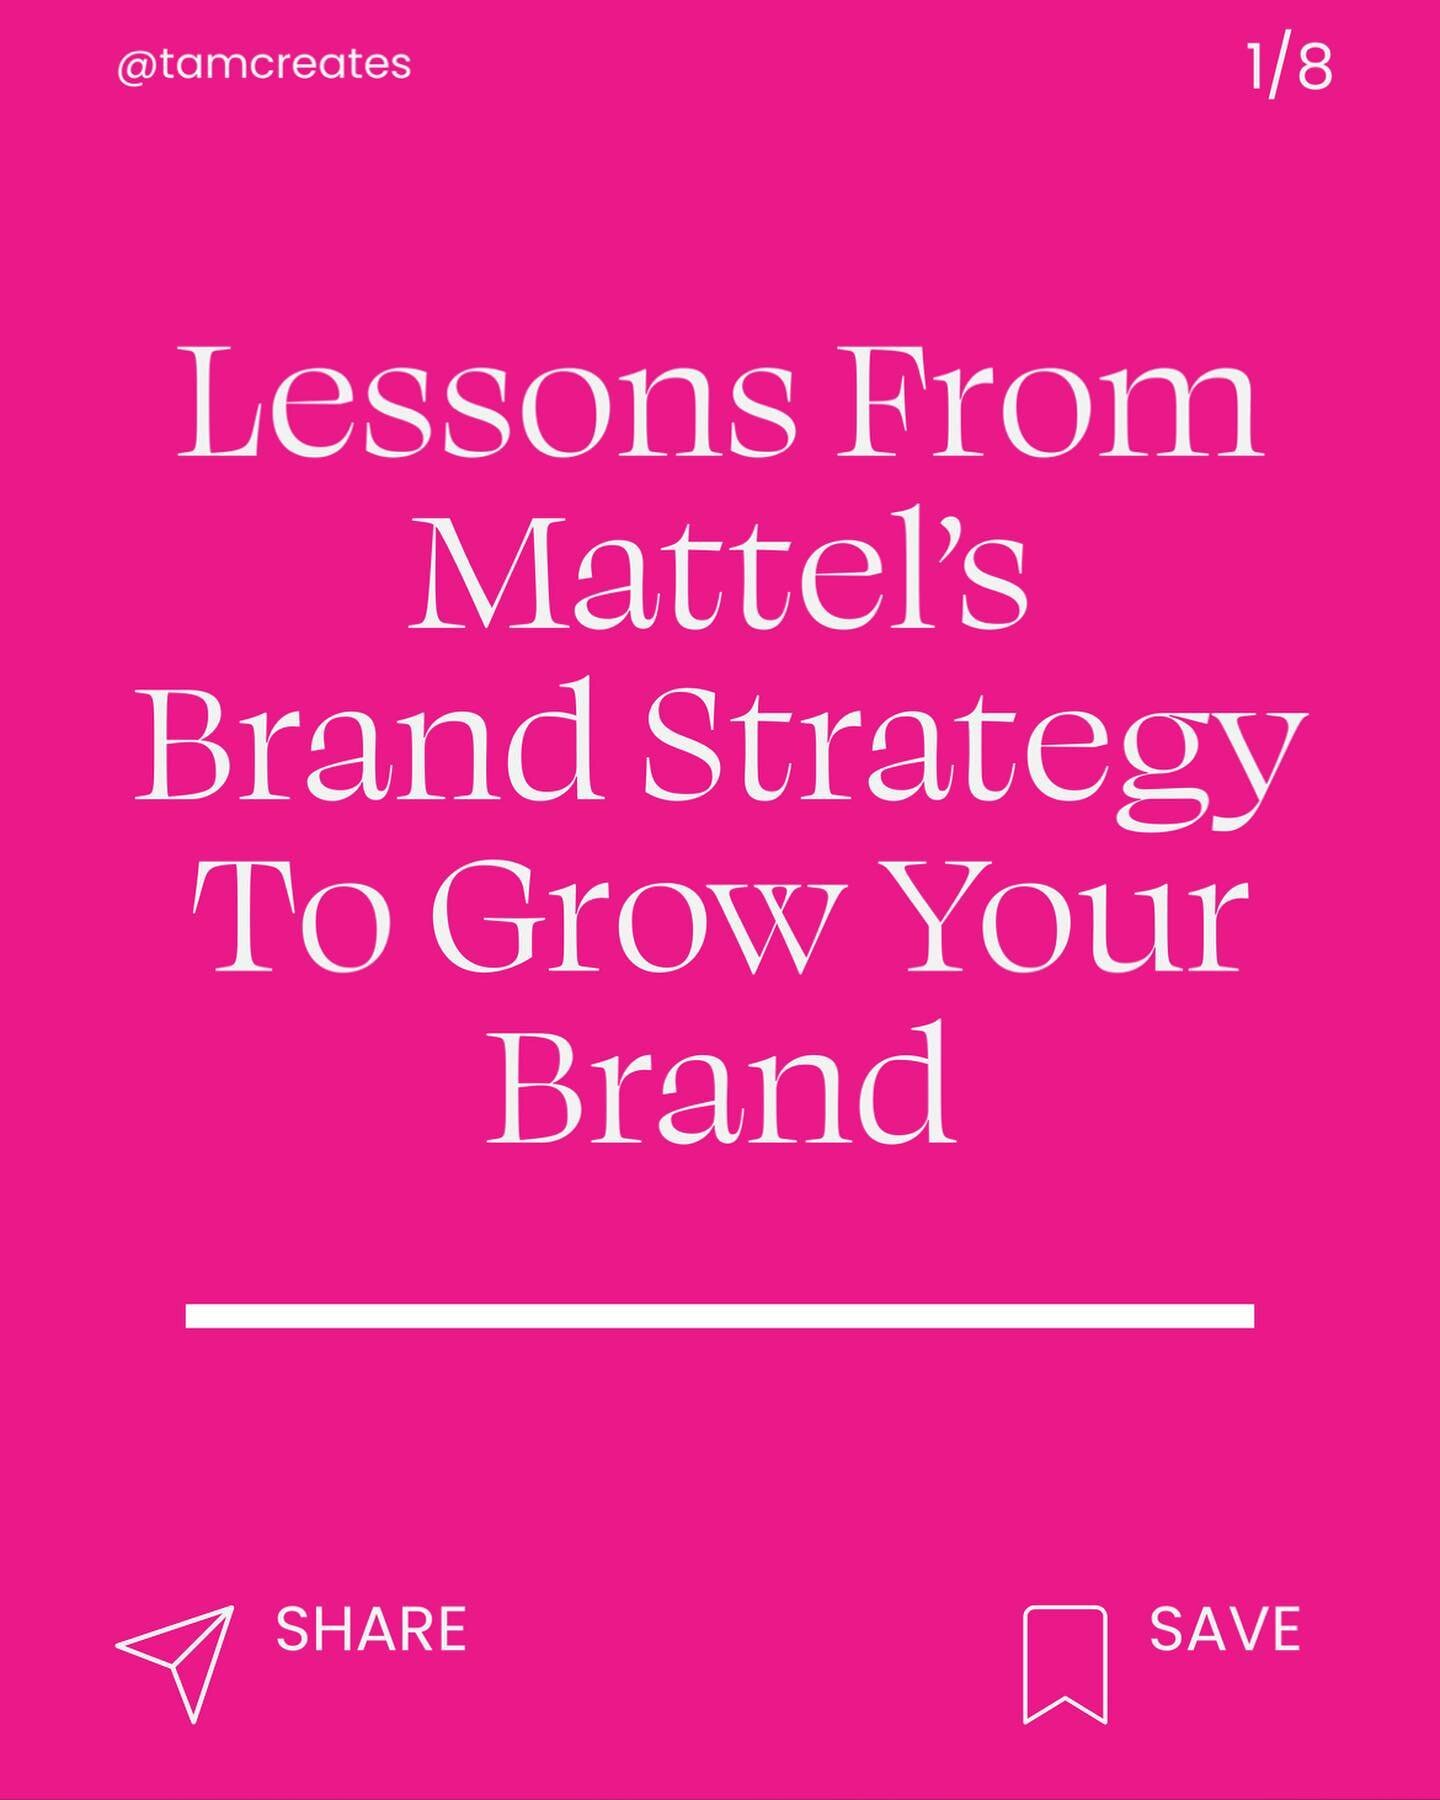 I told y&rsquo;all it&rsquo;s branding week at the Tam Finley Design Studio. Today, I&rsquo;m taking a deeper dive into Mattel&rsquo;s brand strategy and how you can make it work for your brand. 

Save this post for future reference.

Share this post